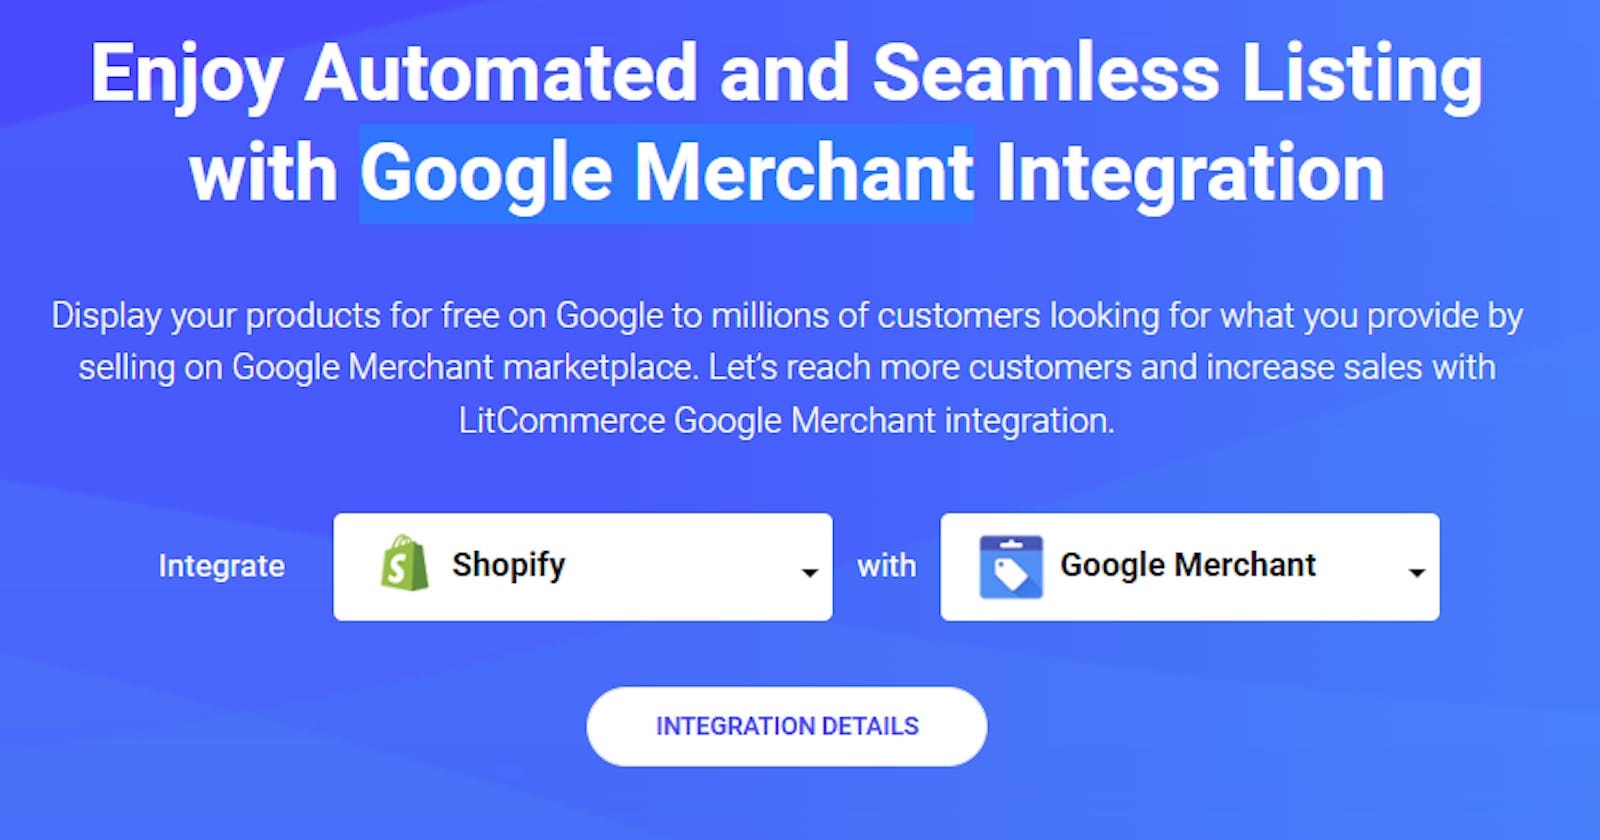 Automate and streamline listings with Google Merchant Integration